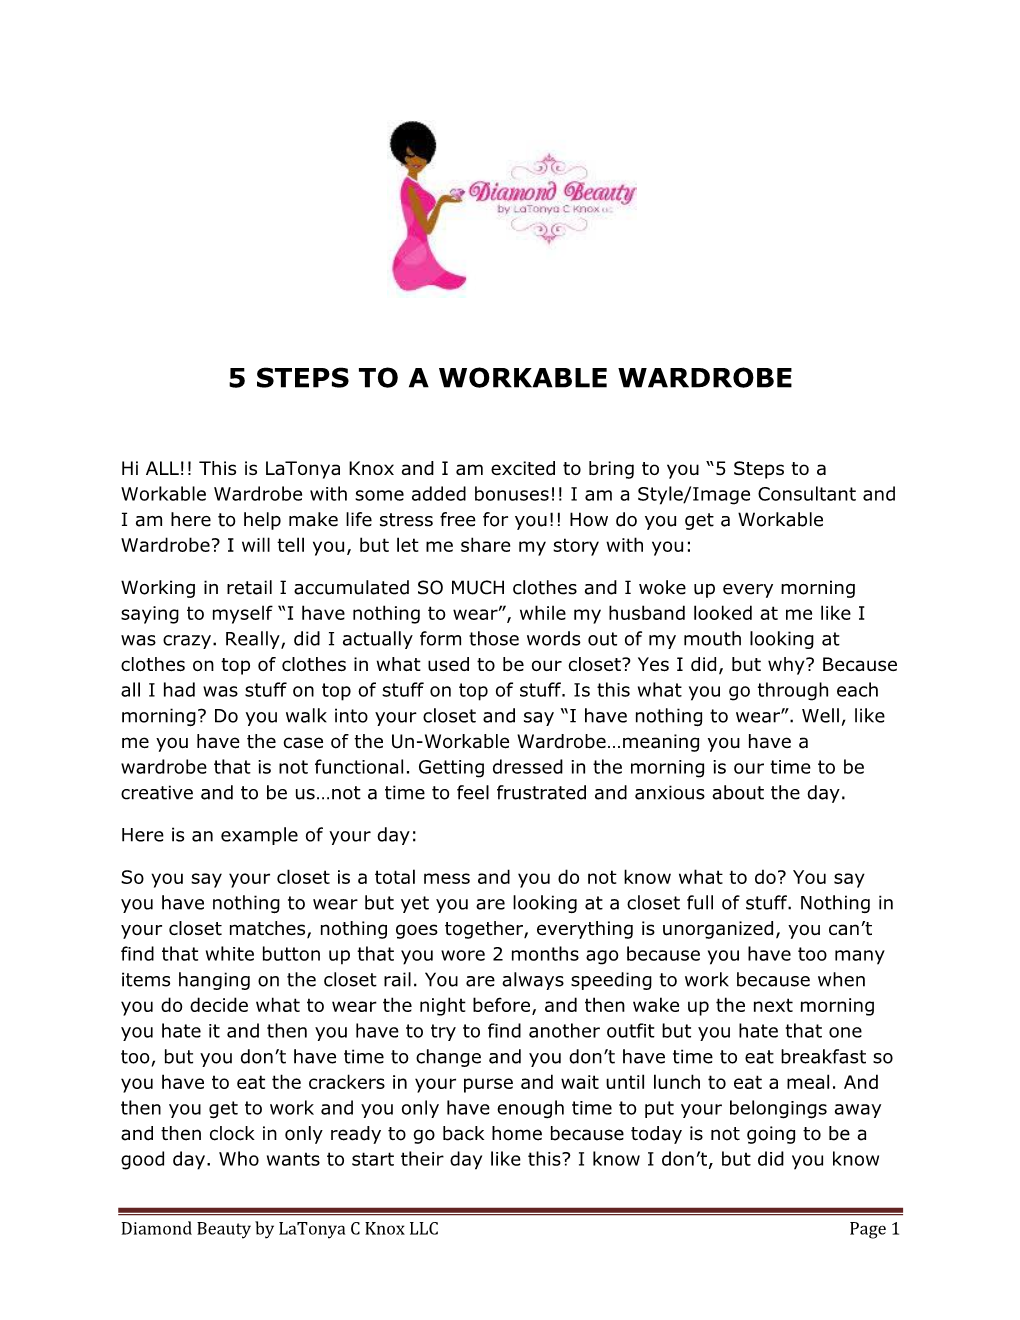 5 Steps to a Workable Wardrobe